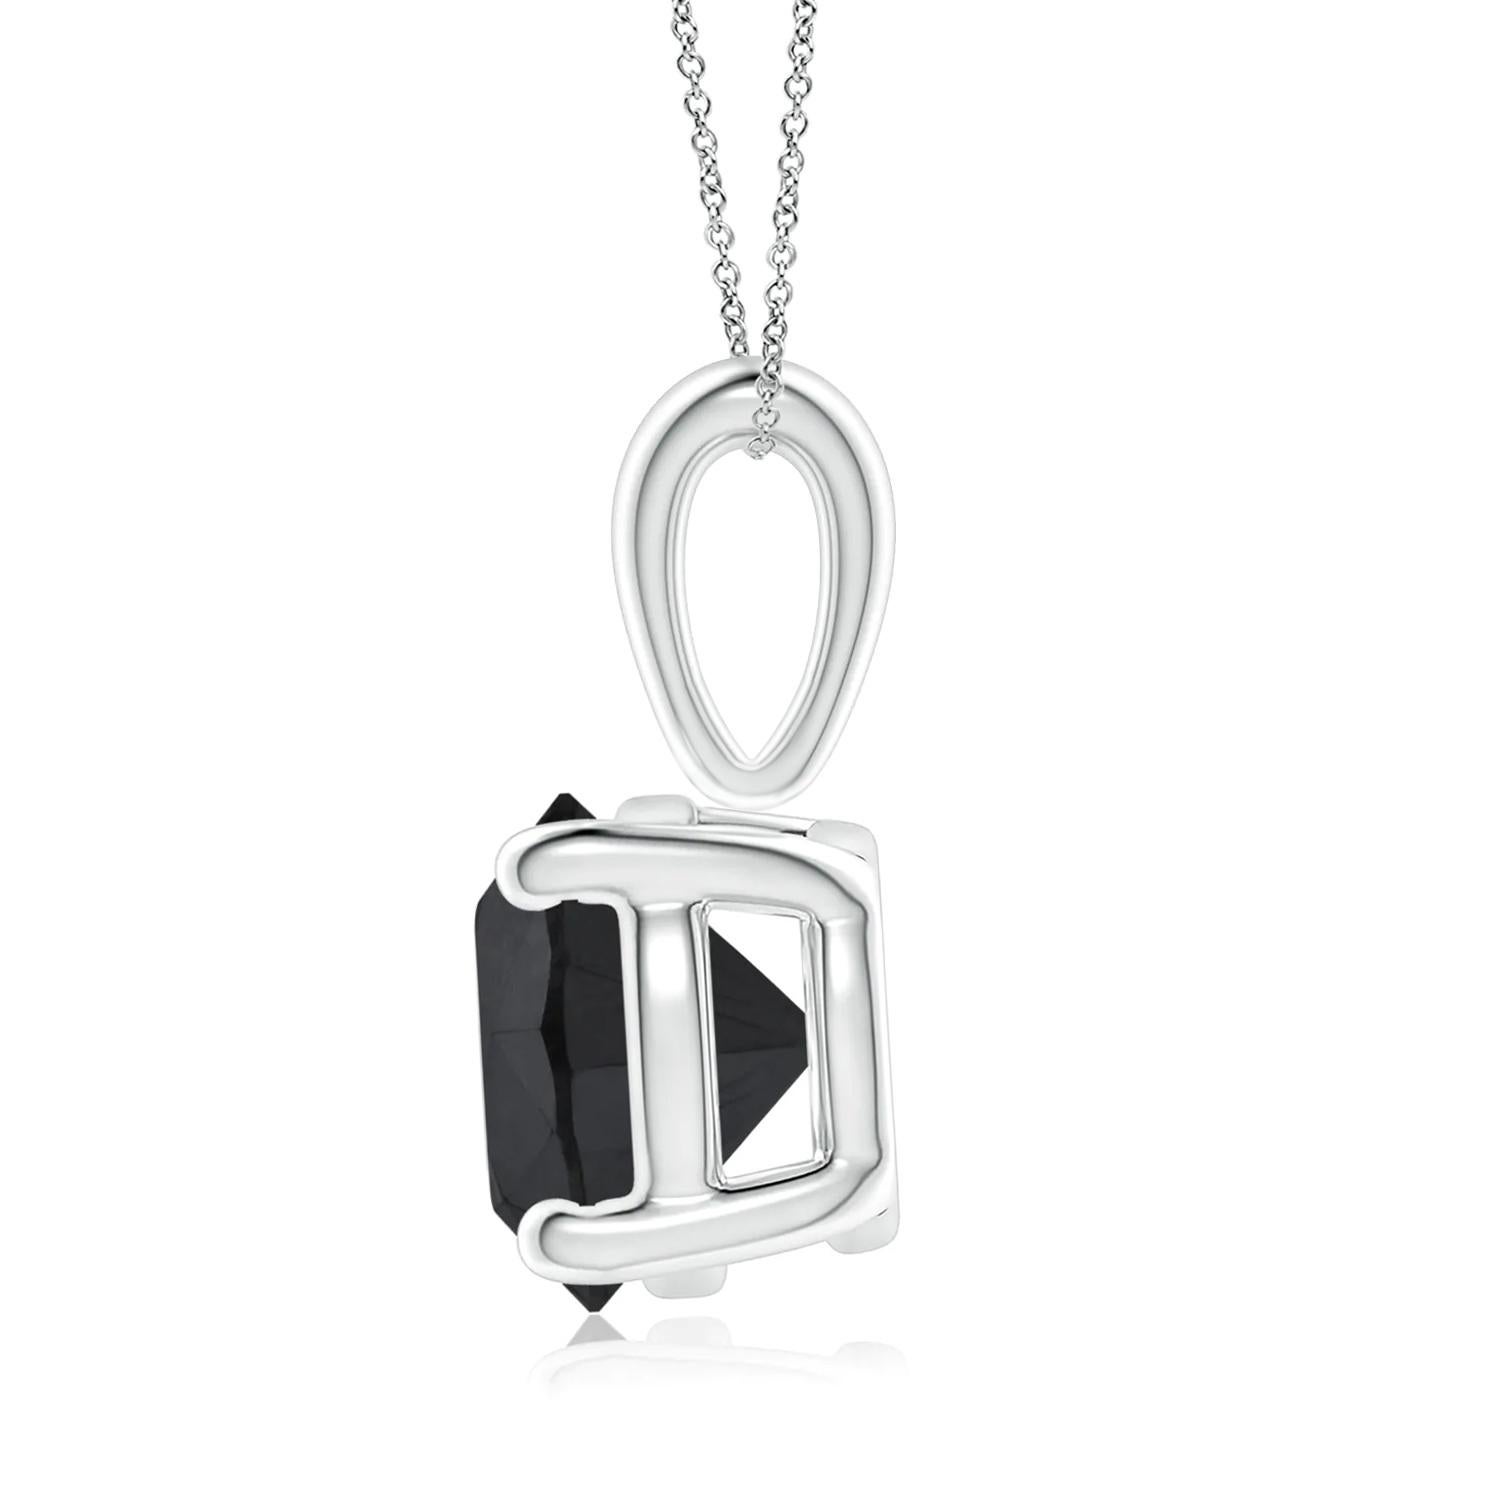 Surprise a special woman in your life with this breathtaking, statement hand crafted solitaire black diamond necklace. This eye-catching pendant necklace features a 1.6 carat round cut black diamond, measuring 6.70 x 6.79 x 4.86 mm set in 14k white